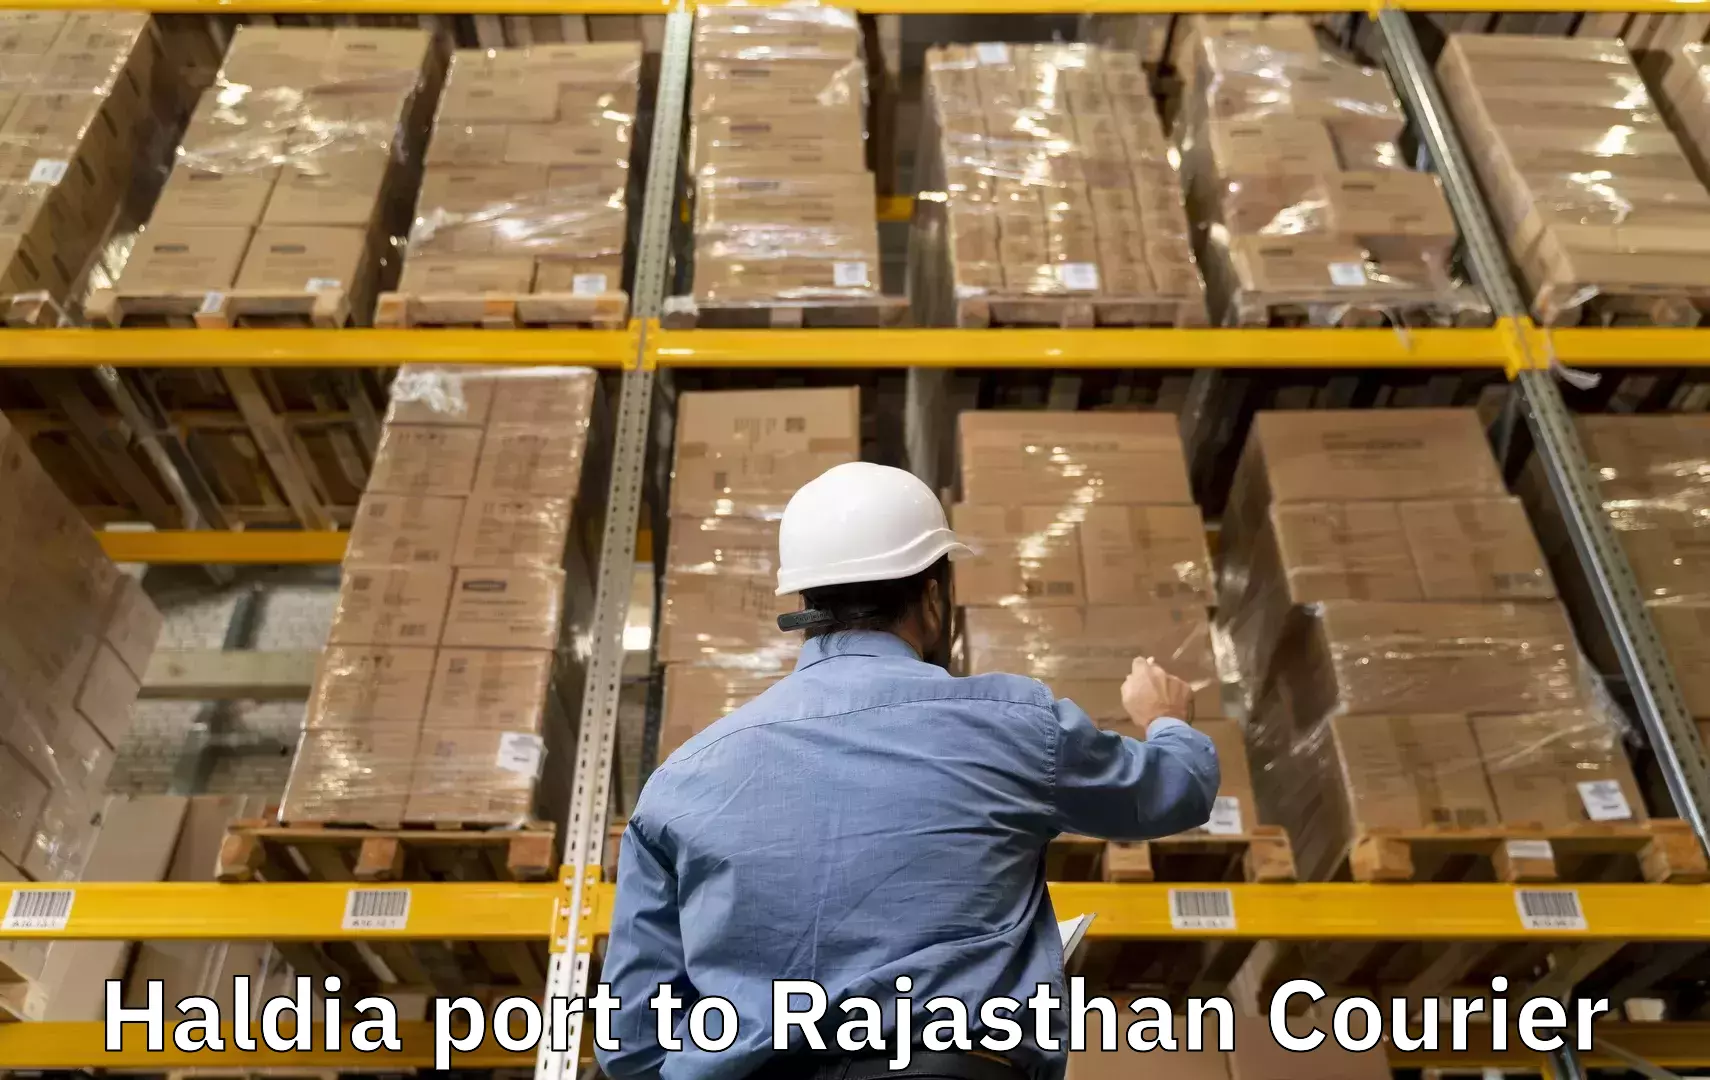 Sports equipment baggage shipping in Haldia port to Nohar